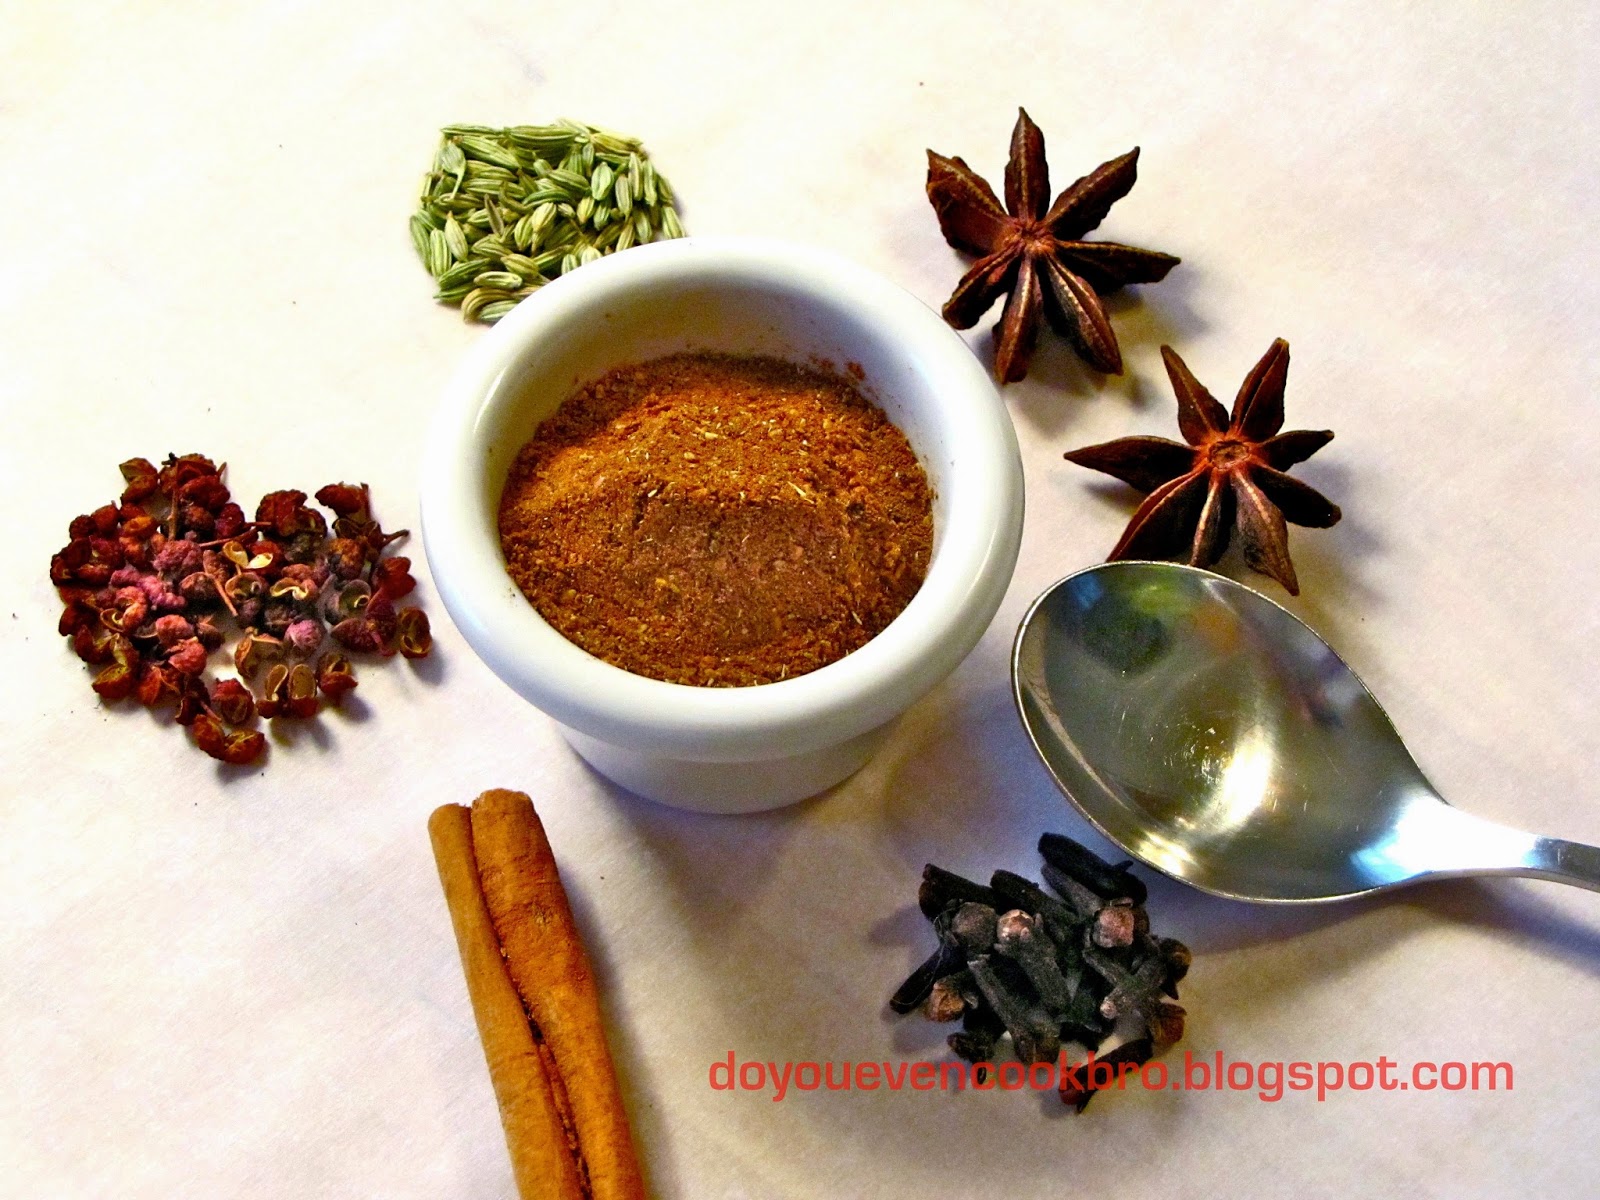 How to make authentic Chinese Five Spice